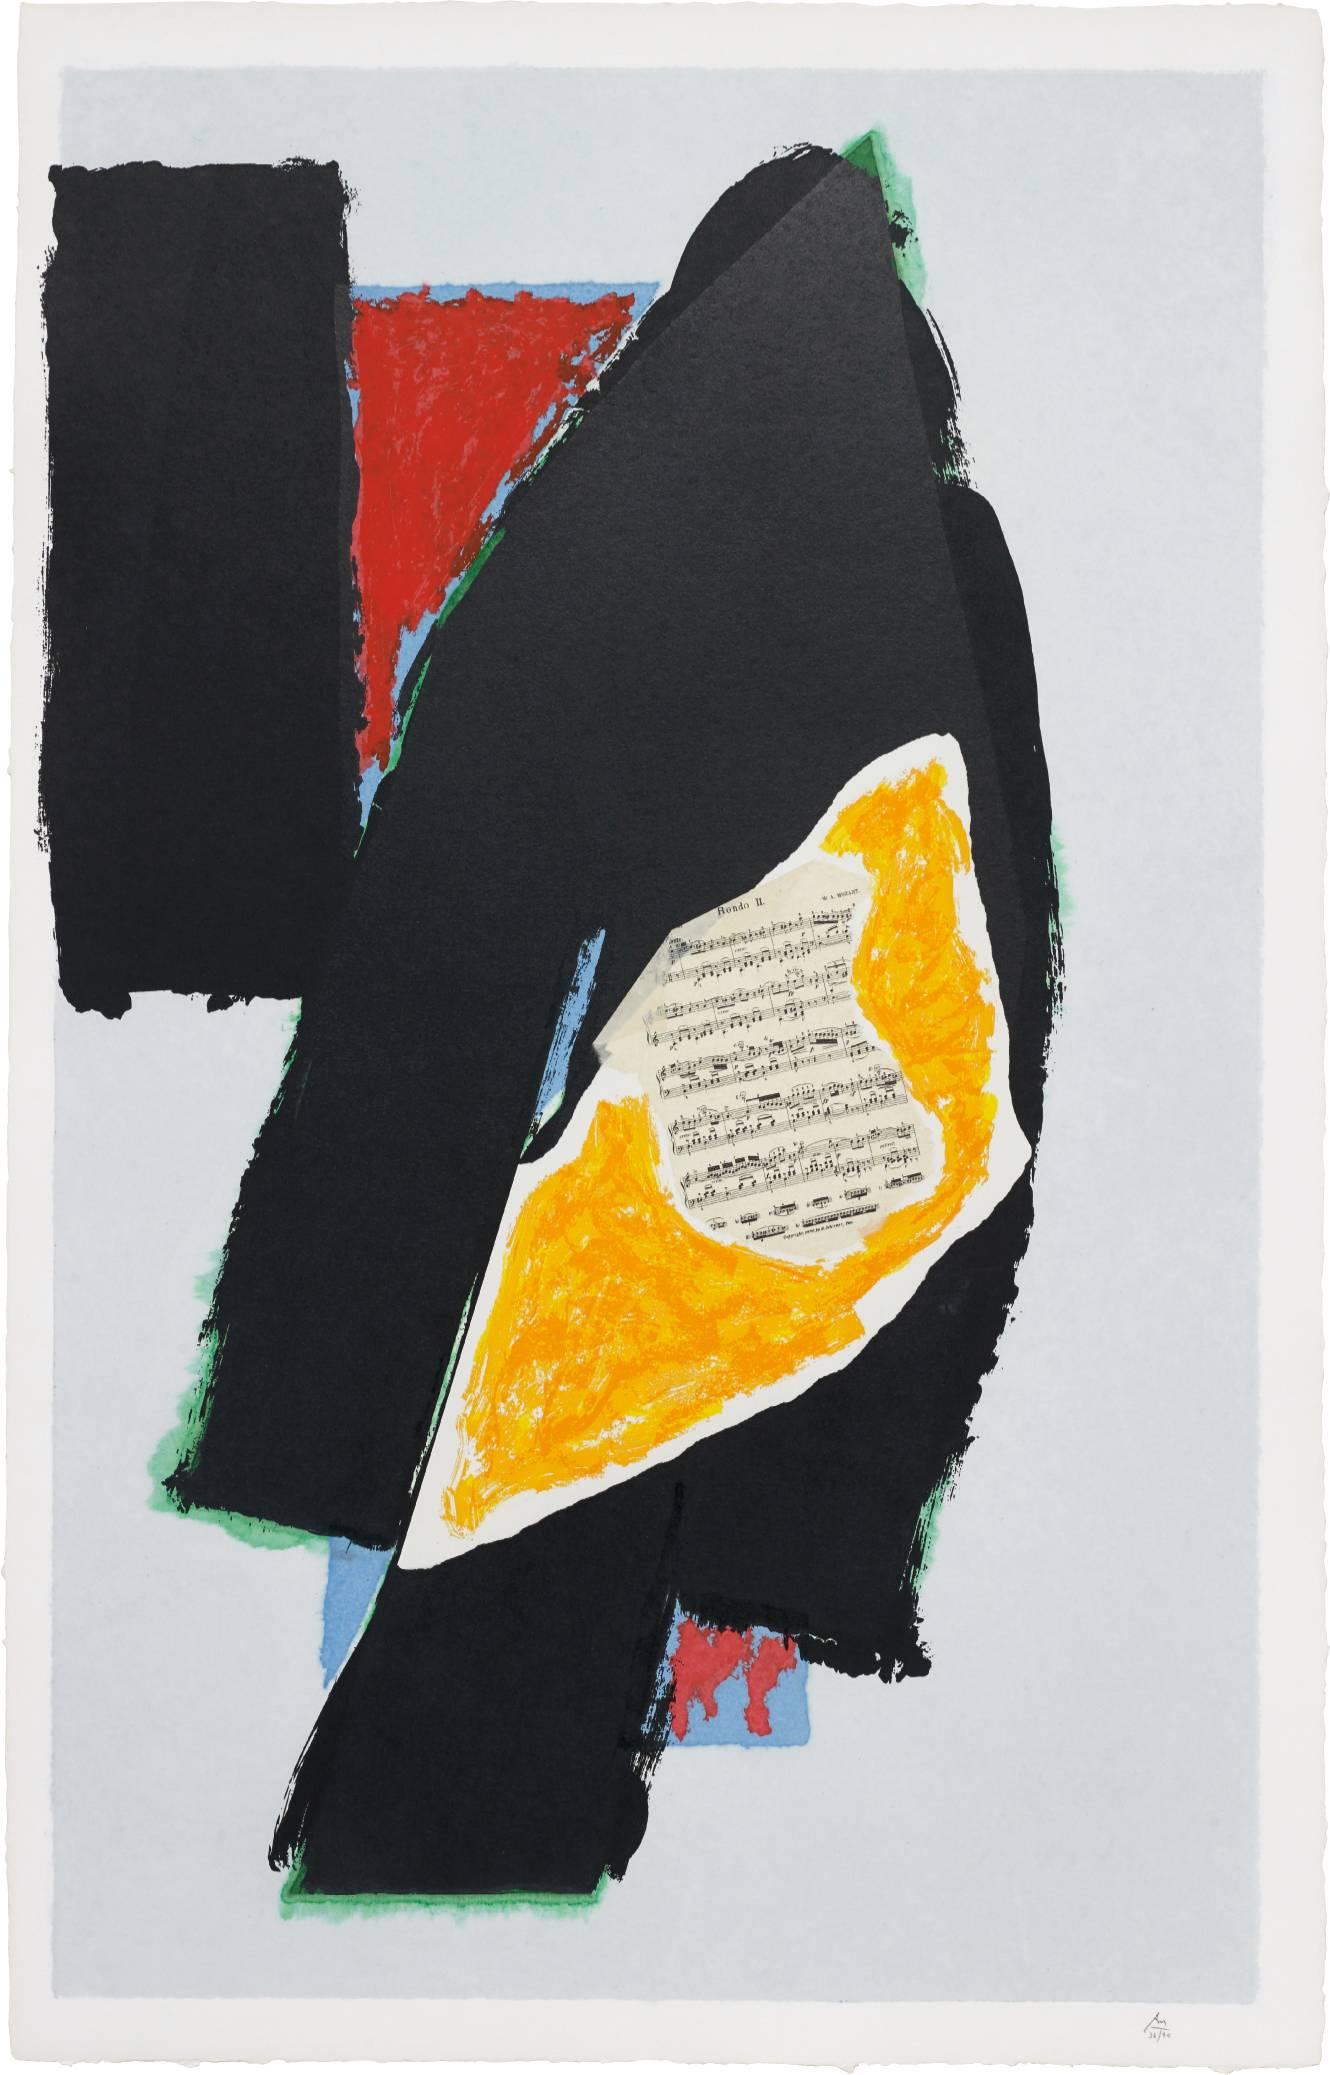 Robert Motherwell Abstract Print - Black for Mozart